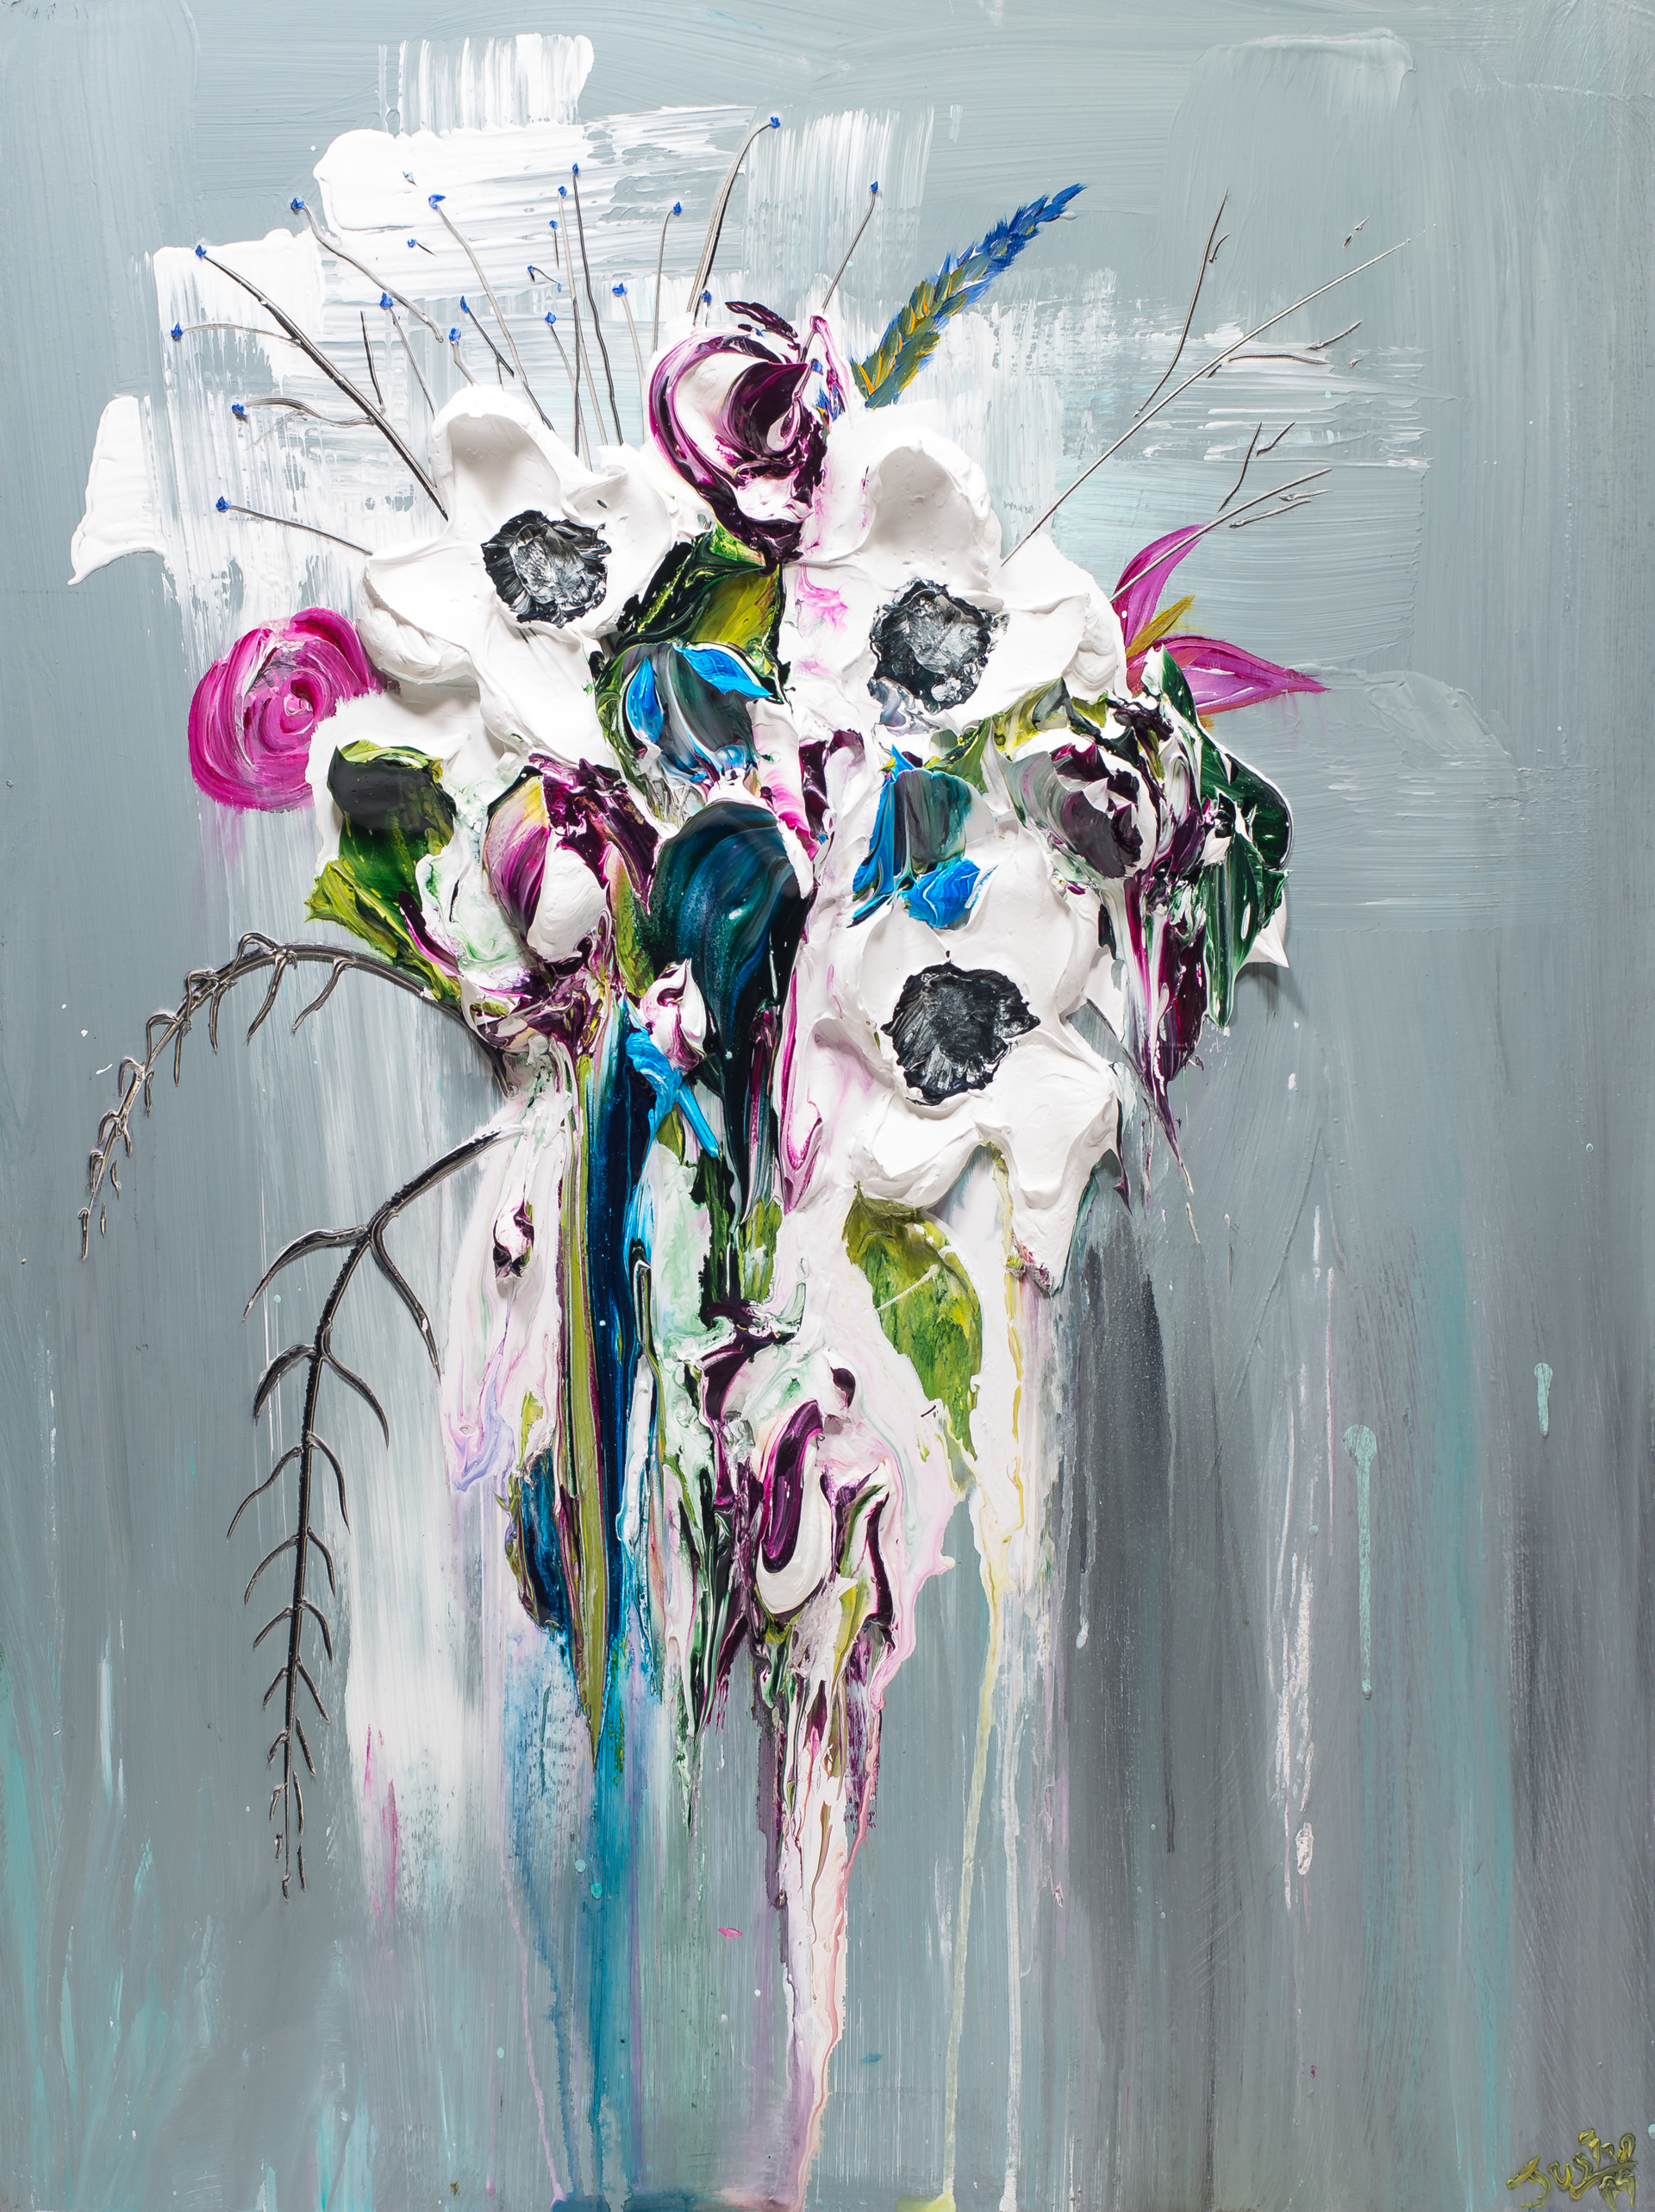 ABSTRACT FLORAL BOUQUET ORIG 001 by JUSTIN GAFFREY